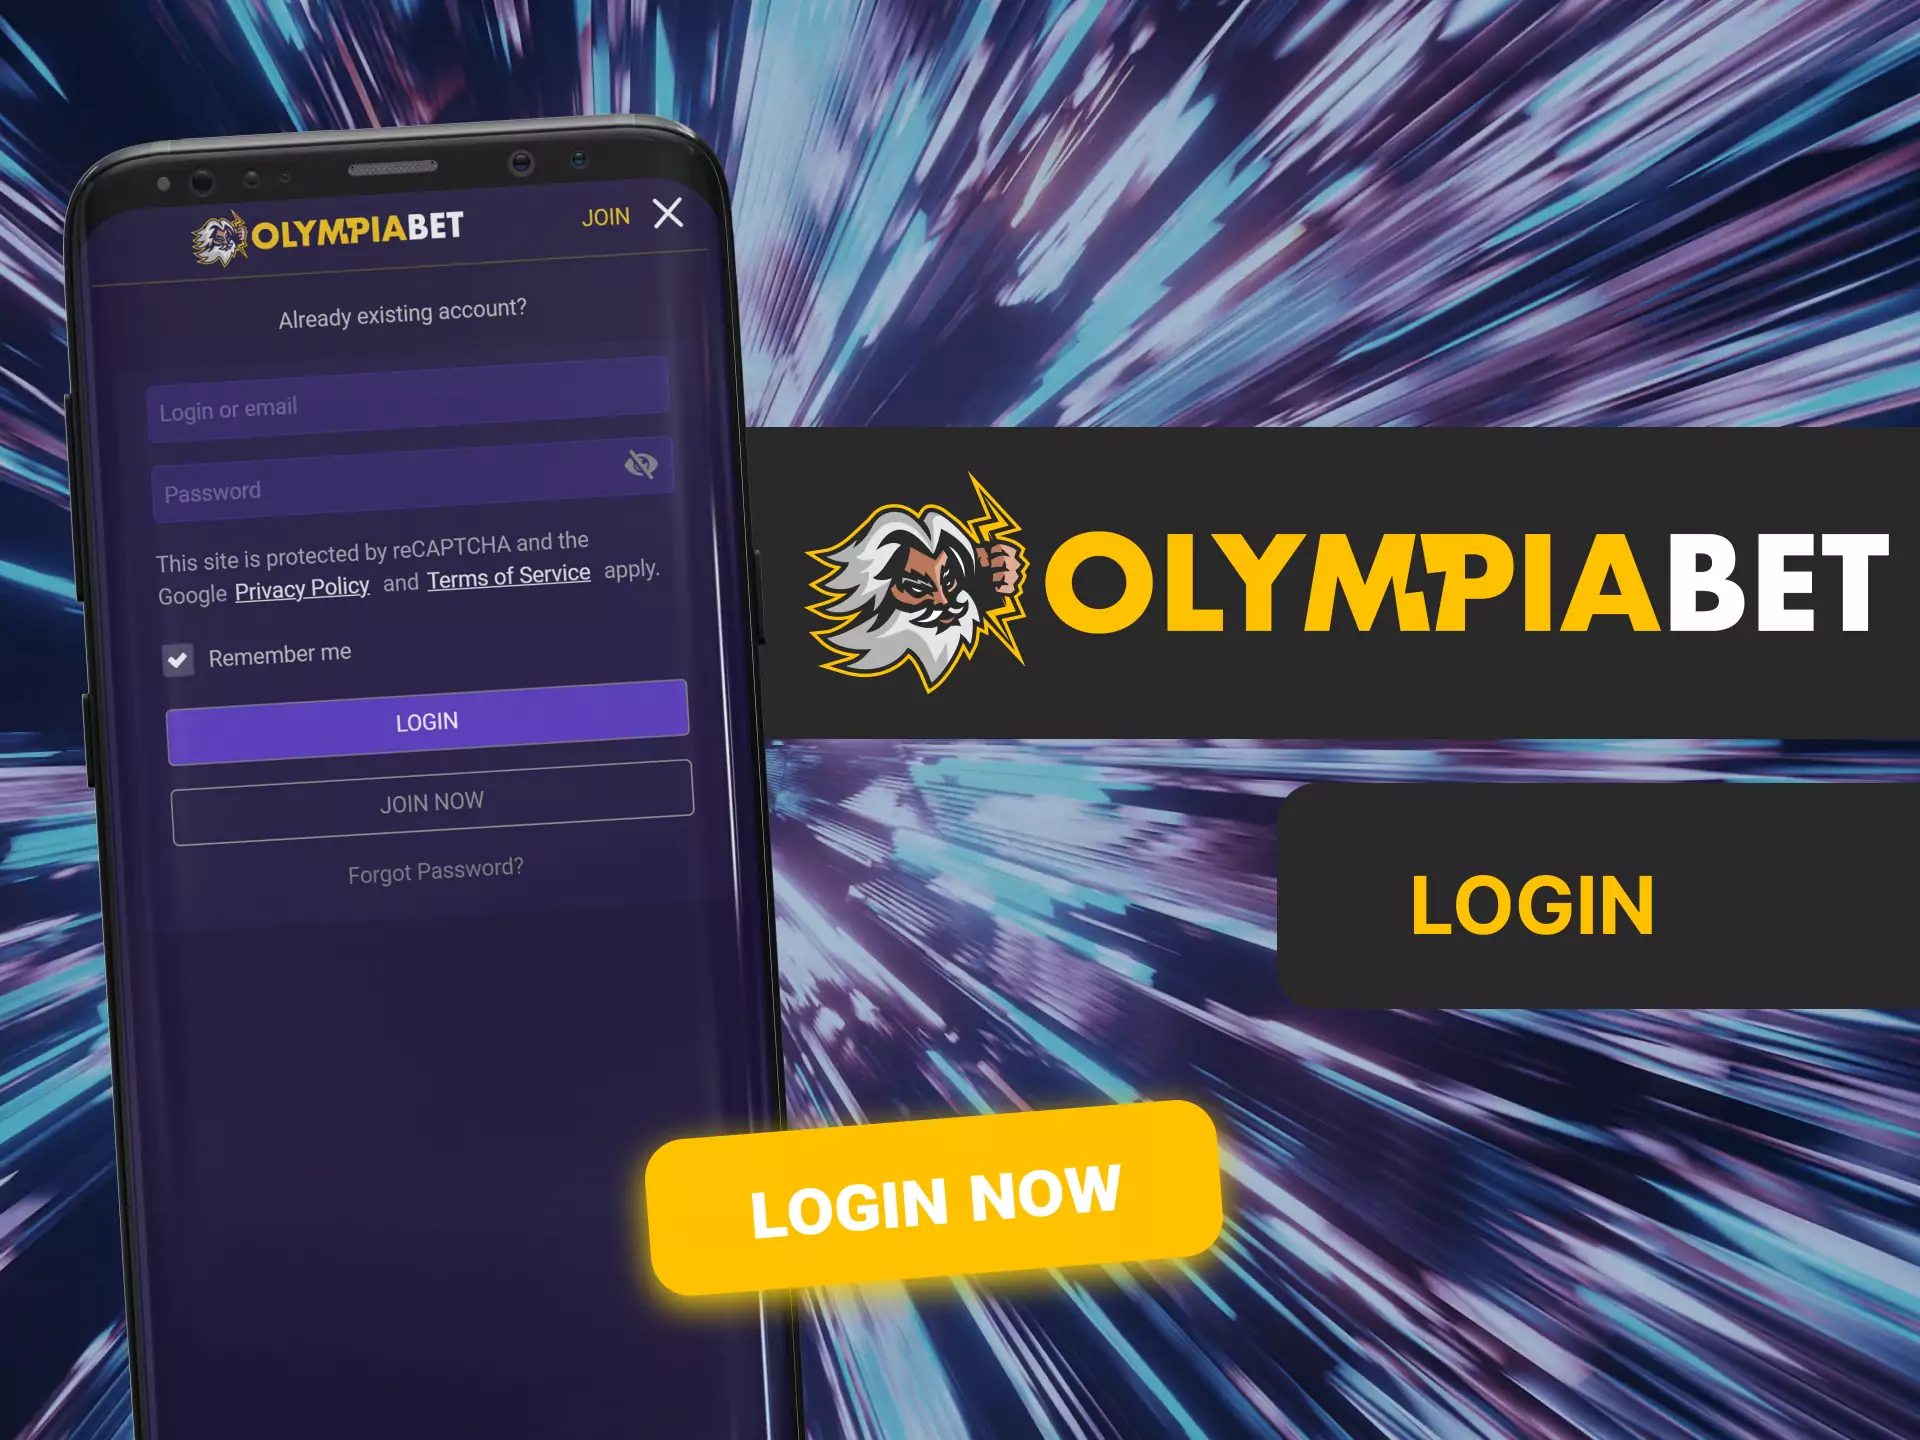 Log into your OlympiaBet account to place bets and manage the game.